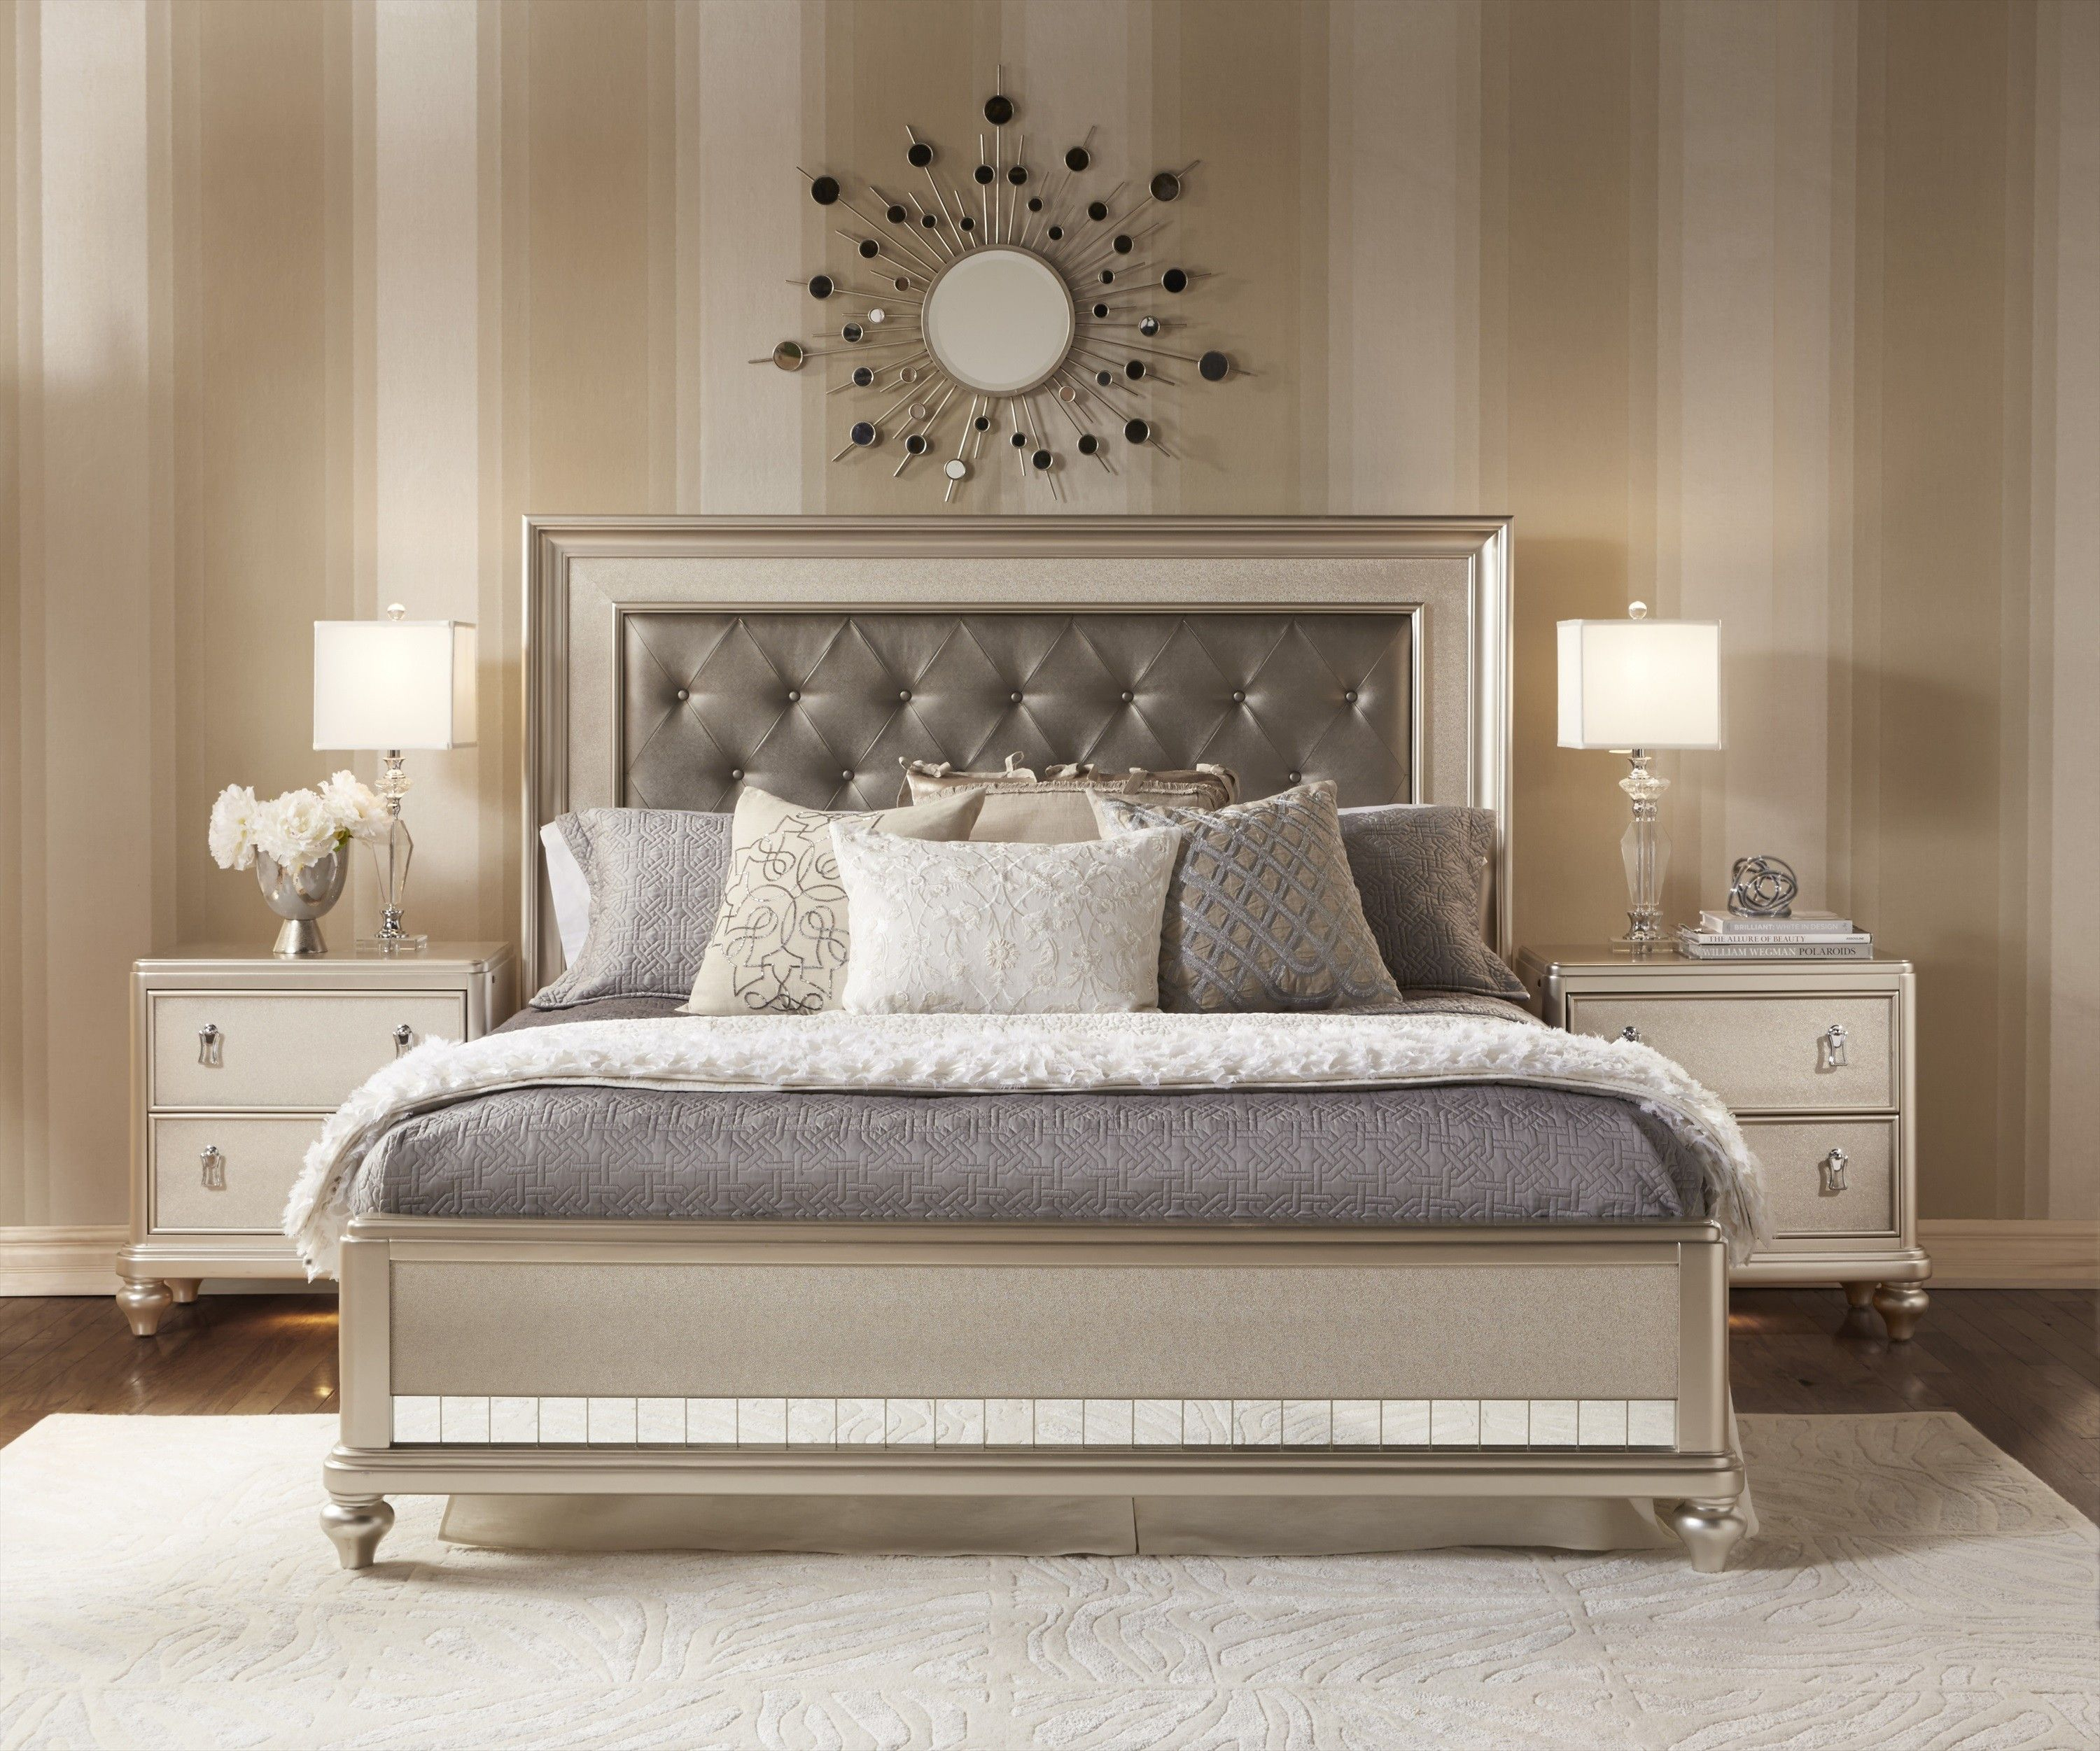 Champagne Bedroom Traditional Champagne Finish Bedroom Master regarding sizing 3000 X 2502